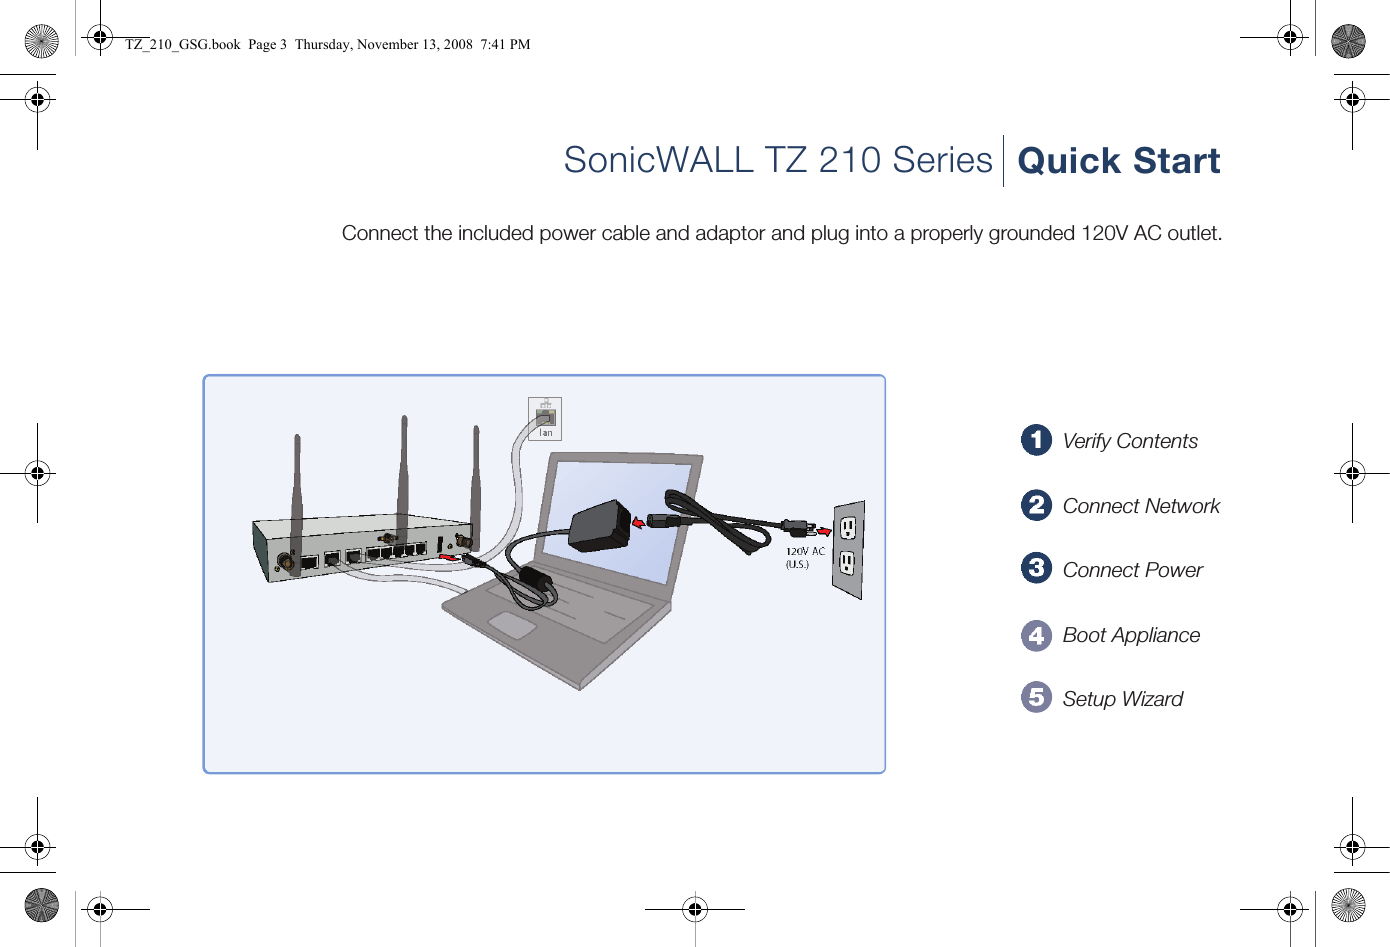 SonicWALL TZ 210 Series Quick StartConnect the included power cable and adaptor and plug into a properly grounded 120V AC outlet.Verify ContentsConnect NetworkConnect PowerBoot ApplianceSetup WizardTZ_210_GSG.book  Page 3  Thursday, November 13, 2008  7:41 PM